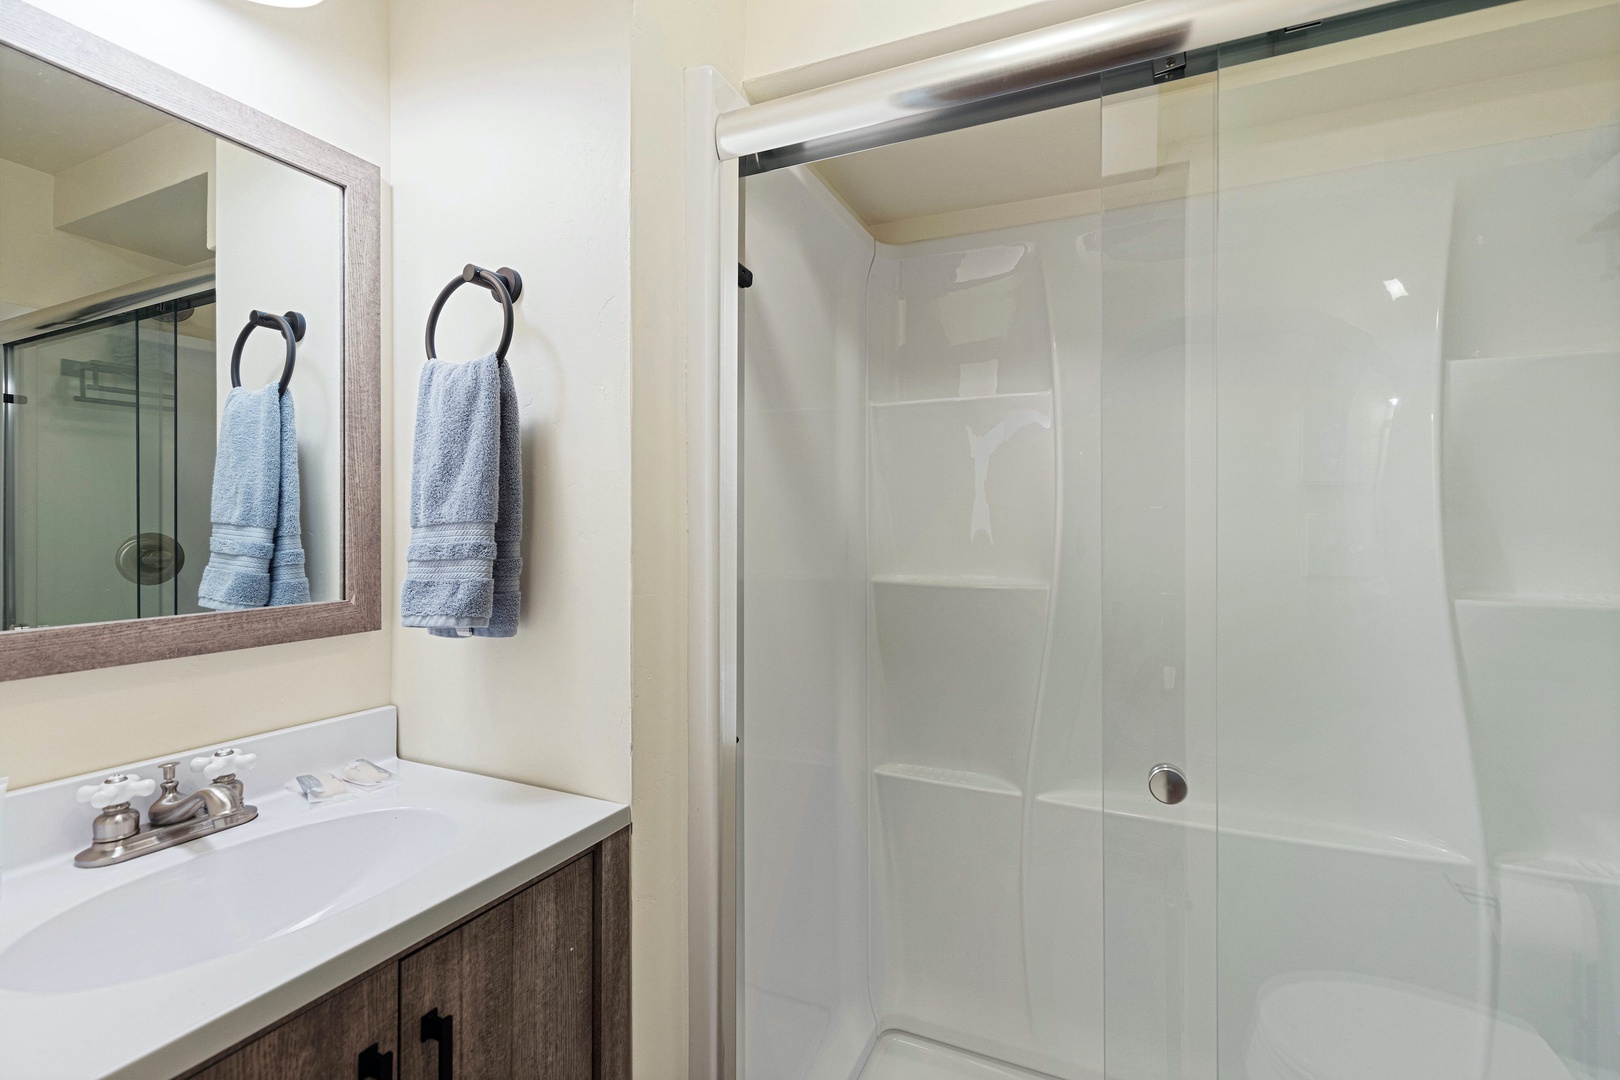 A single vanity & glass shower are available in the lower-level full bath